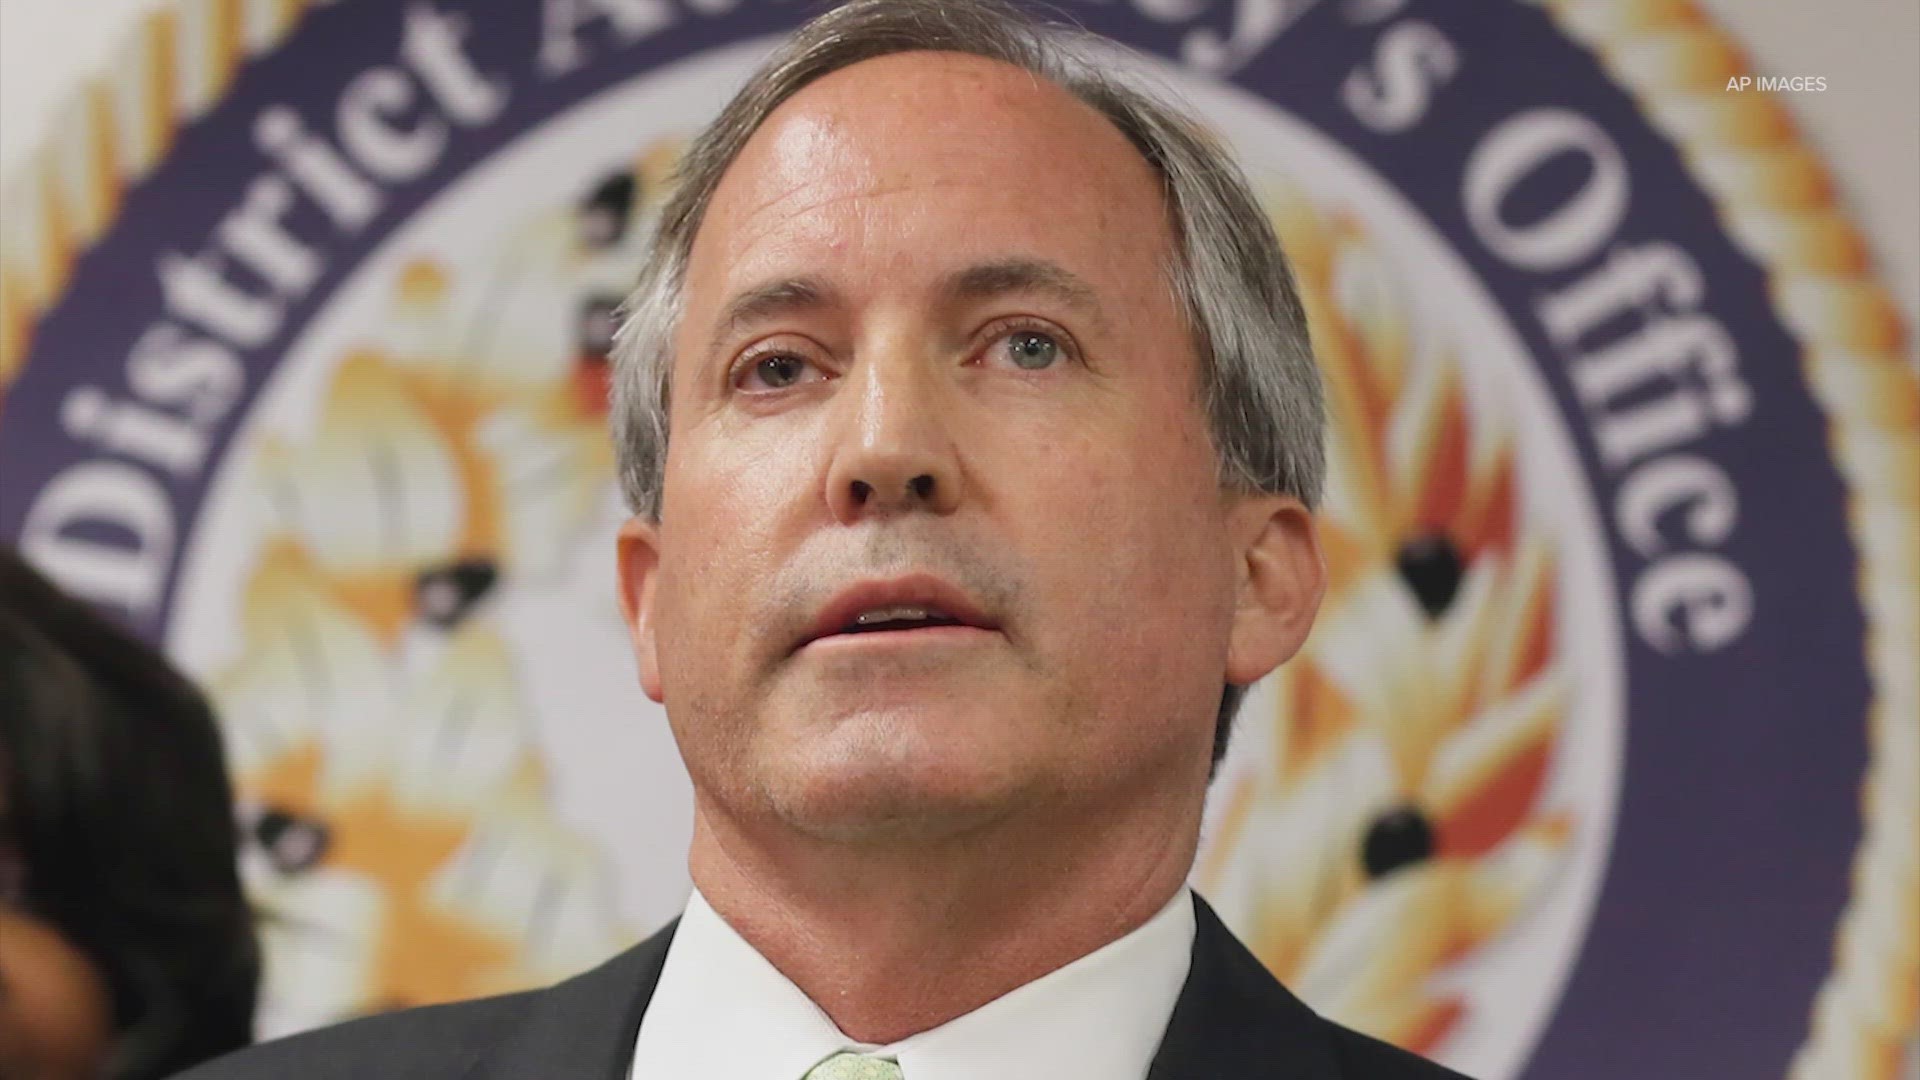 A Texas House committee unanimously adopted articles of impeachment for Texas Attorney General Ken Paxton.